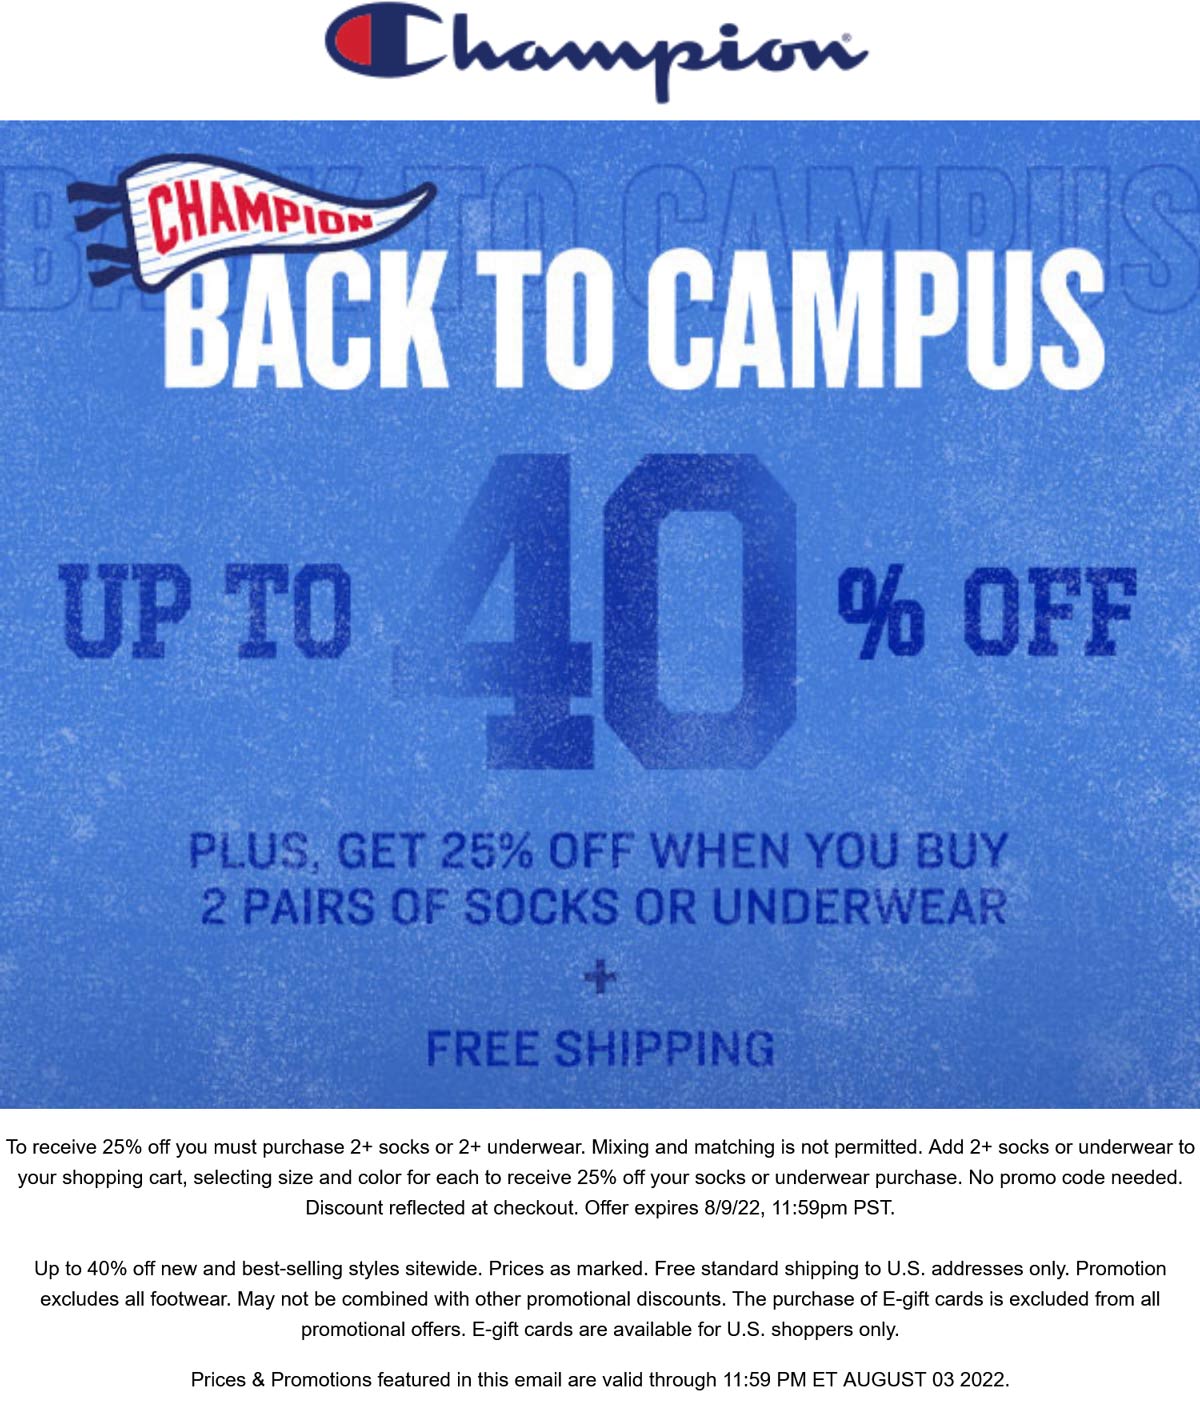 Champion coupons & promo code for [November 2022]